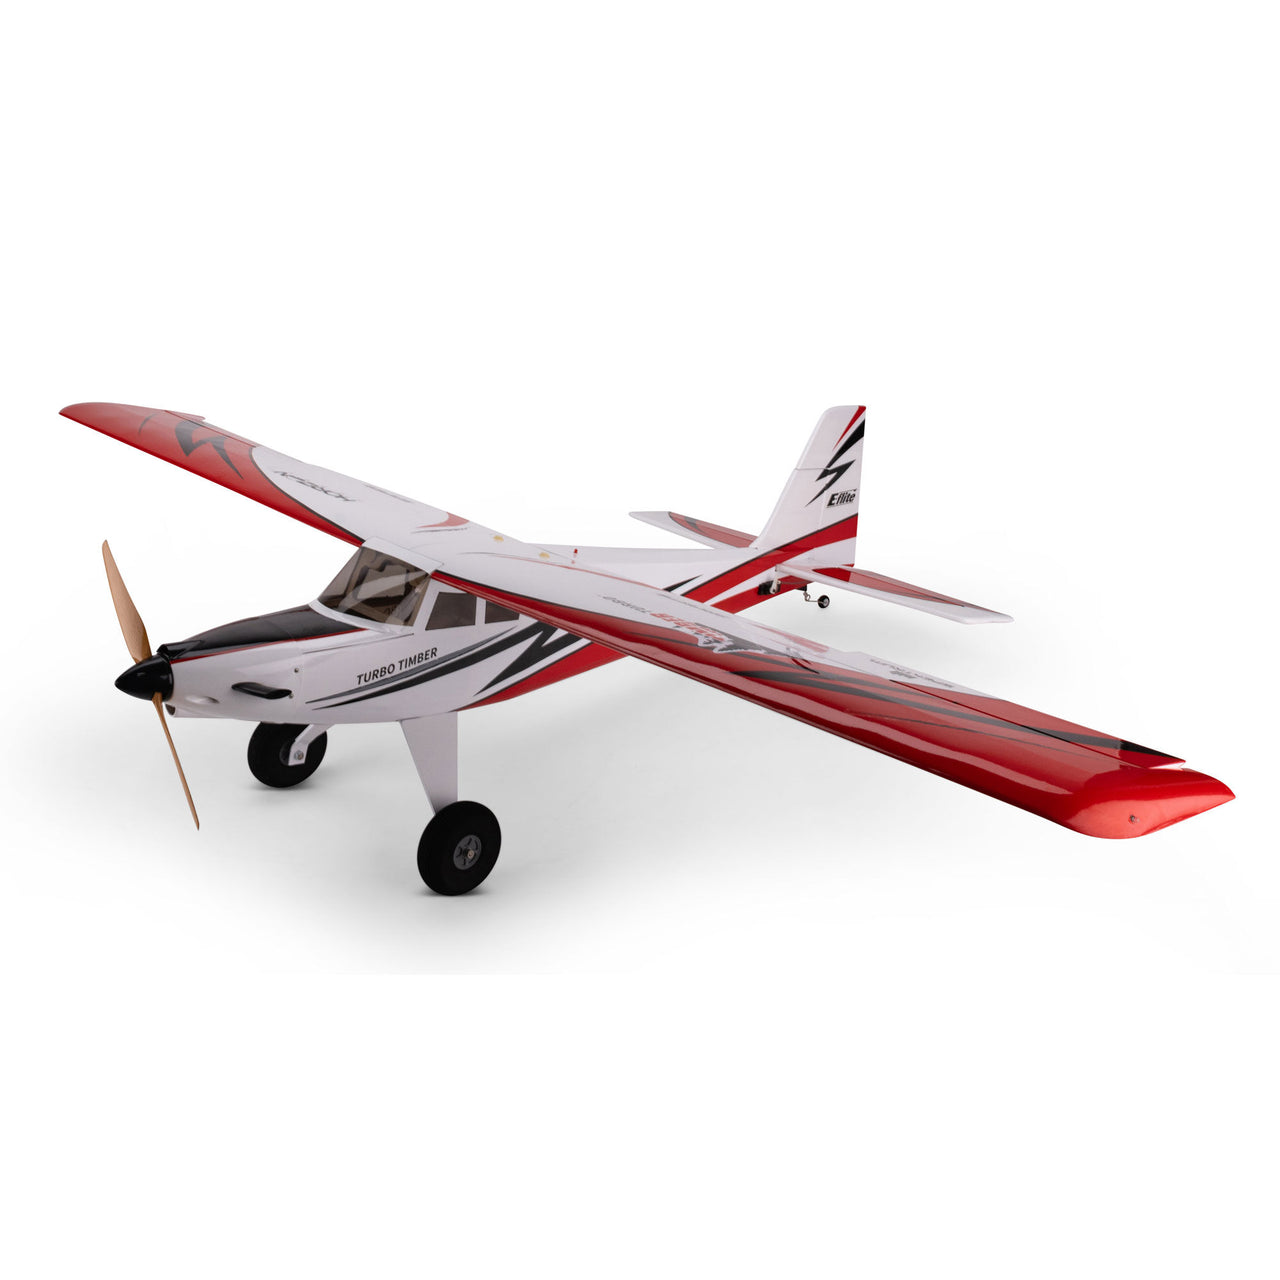 EFL71750 E-Flite Turbo Timber SWS 2,0 m BNF Basic con AS3X y SAFE Select 